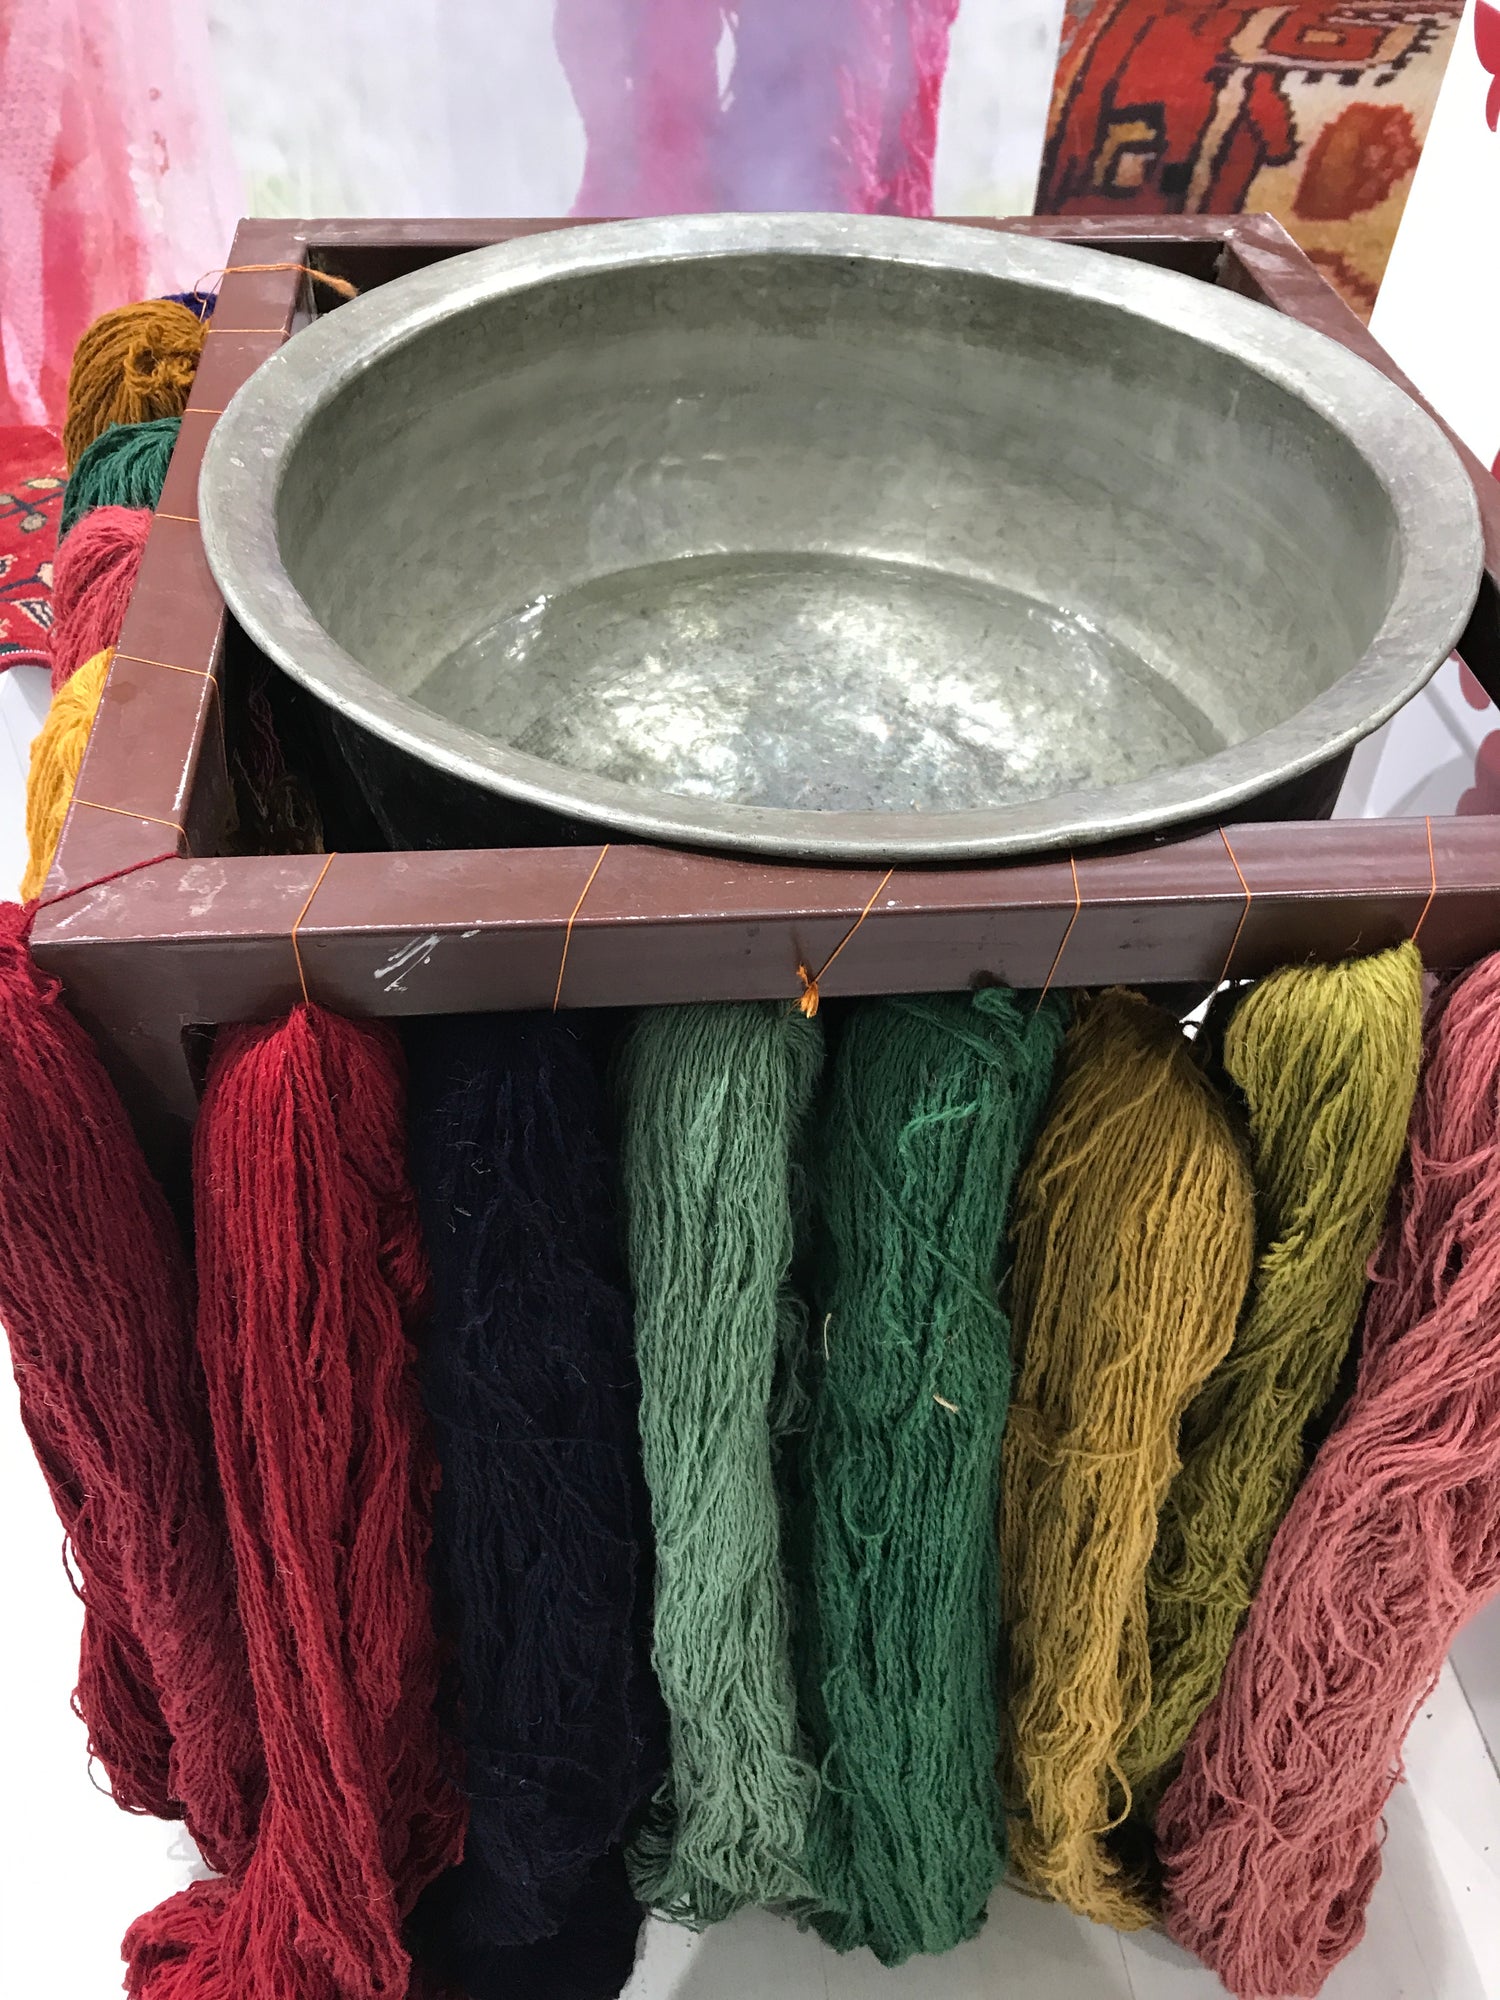 dying threads for rugs